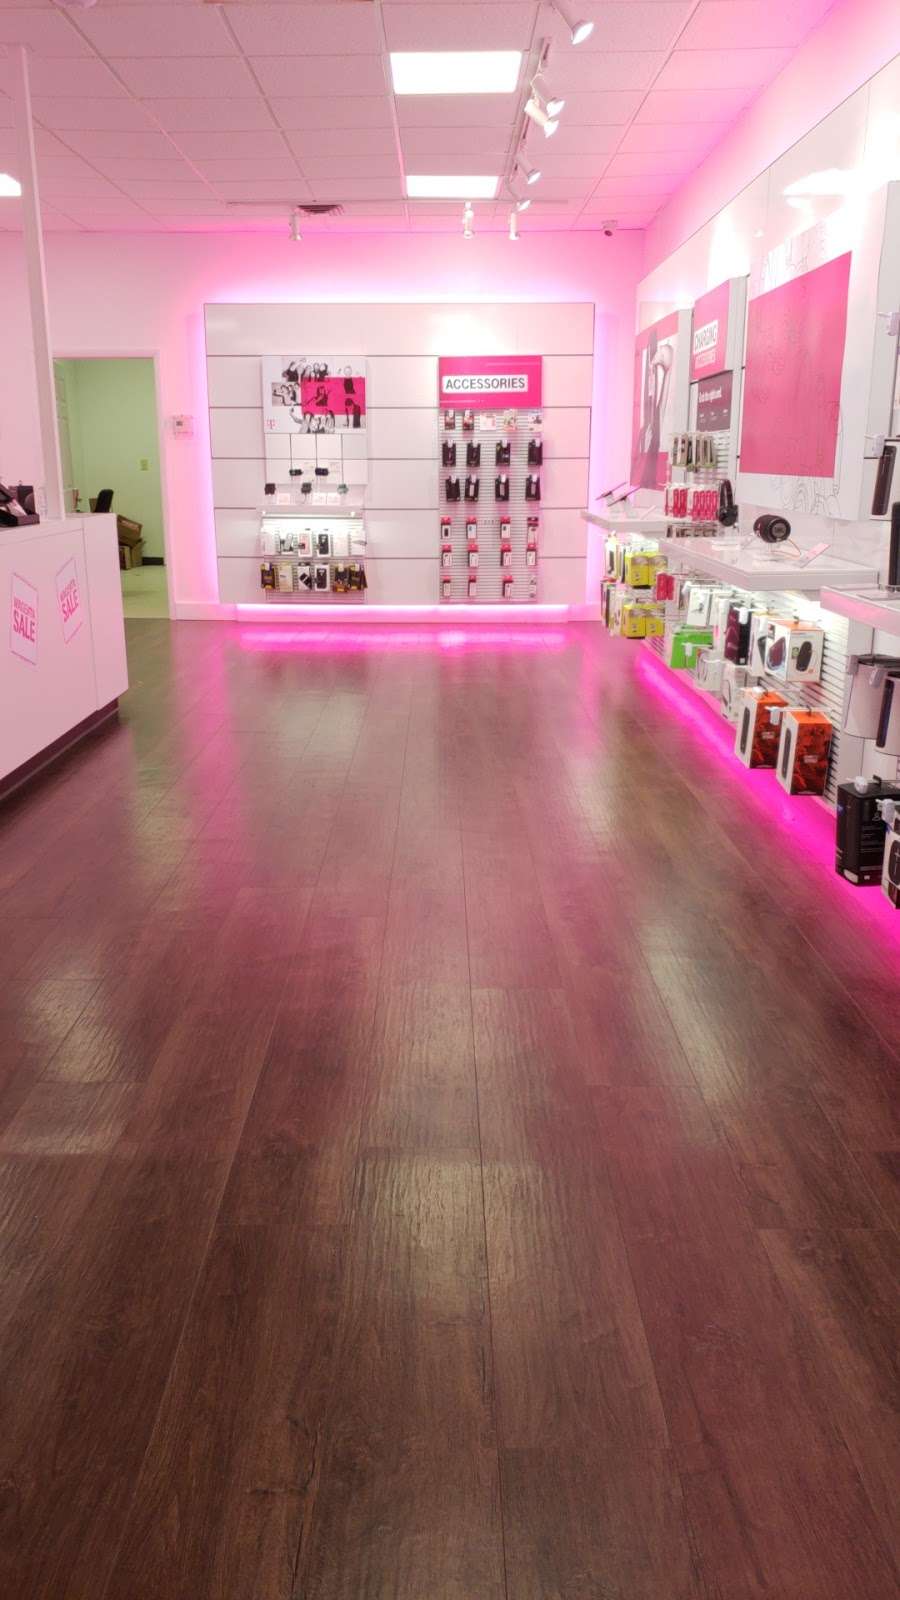 T-Mobile | 11 Main St #15, Hellertown, PA 18055 | Phone: (484) 207-0033